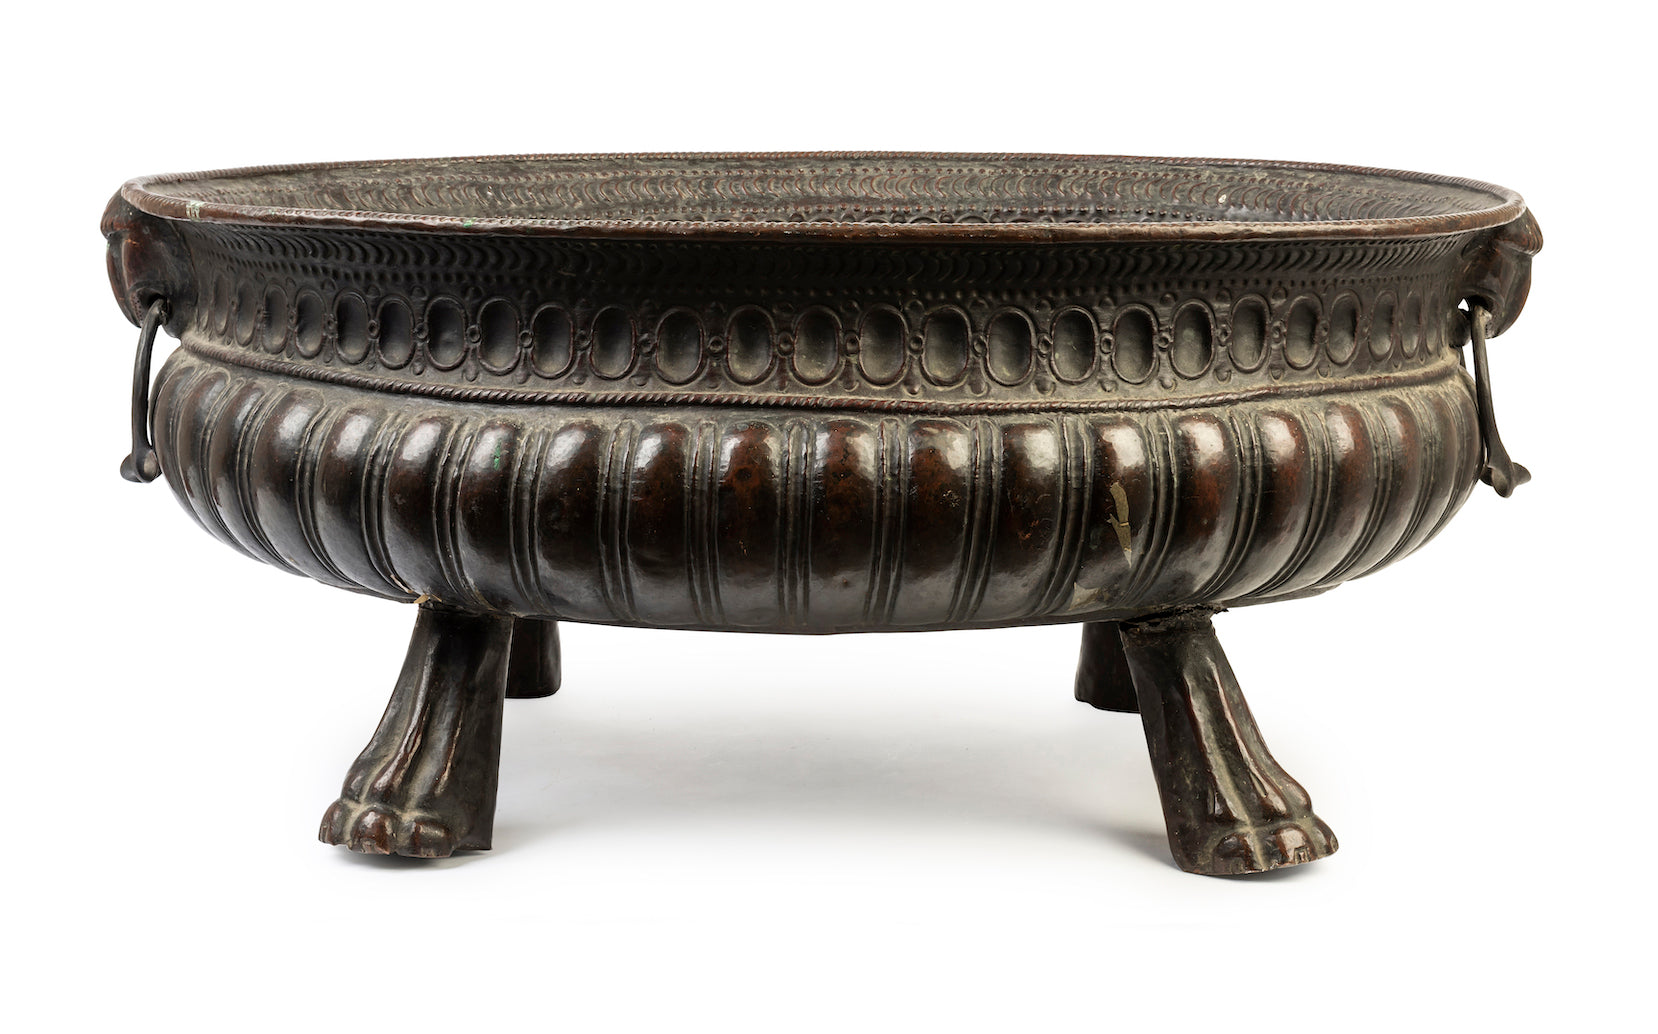 SOLD An impressive oval repousse copper jardeniere, Continental, 19th Century or earlier